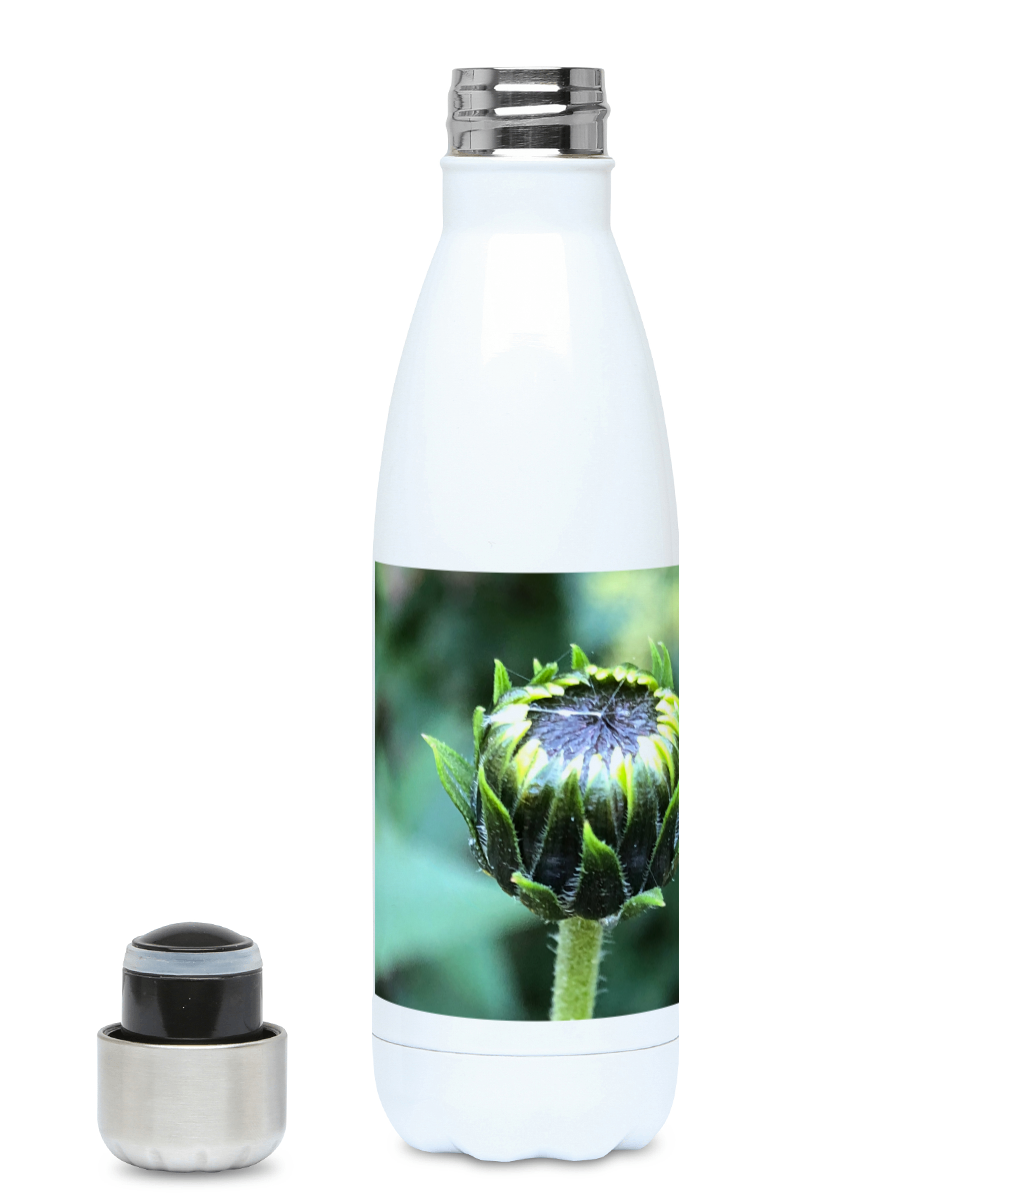 "The next flower waiting to happen" Green Flower 500ml Water Bottle - Nature of Flowers